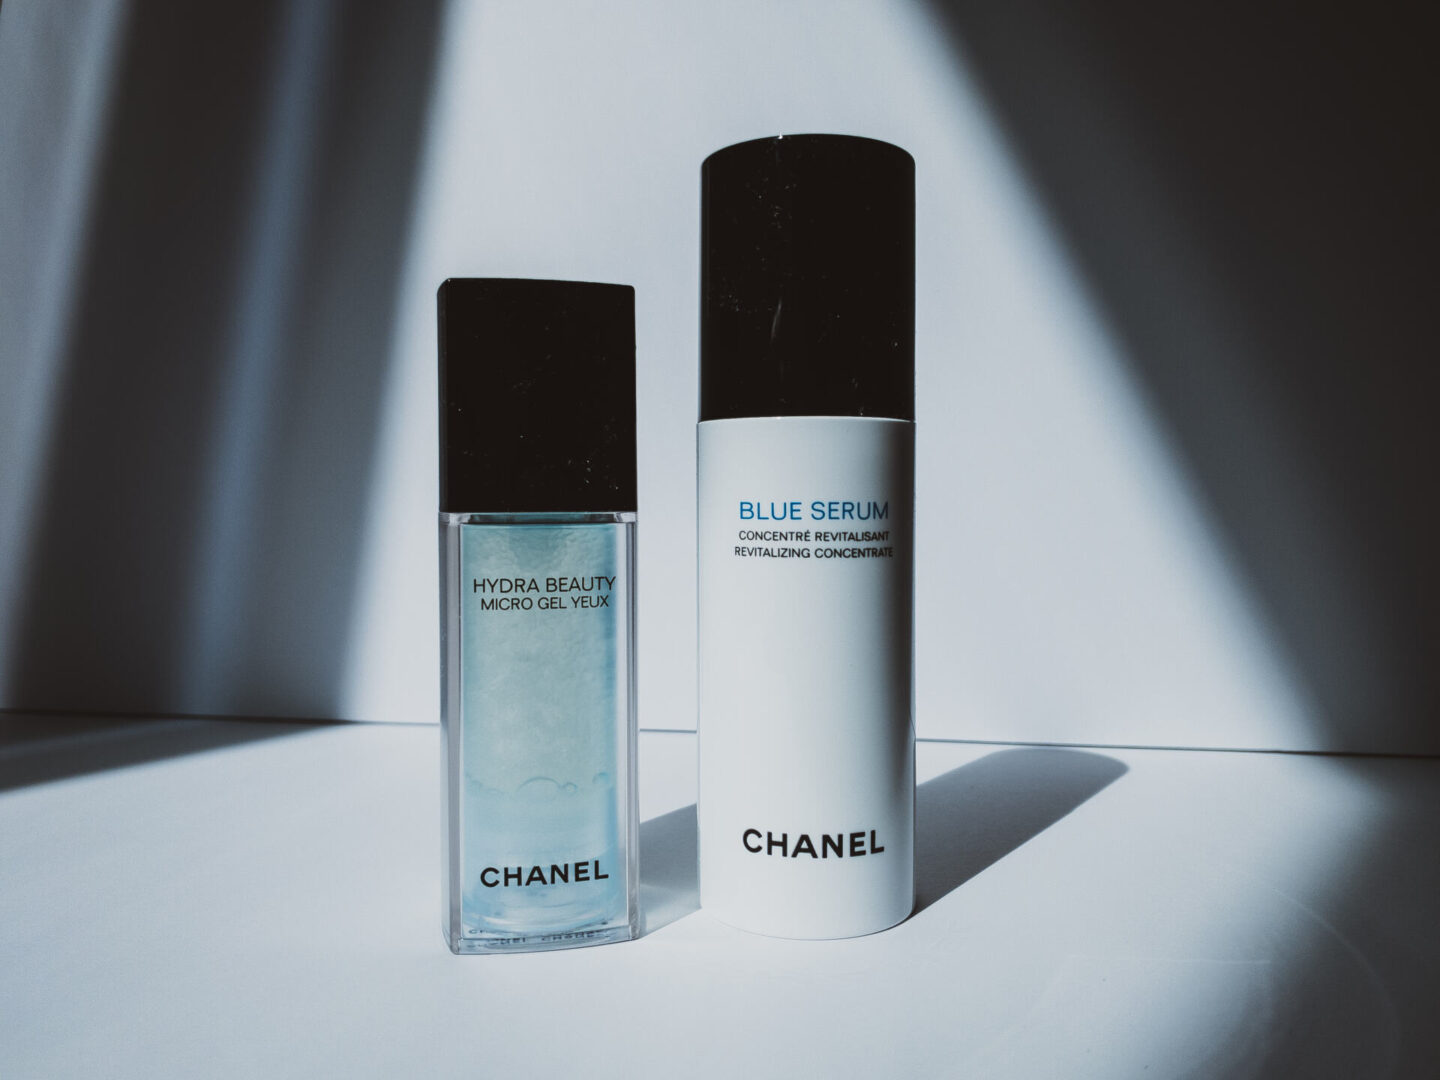 Chanel Hydra Beauty Micro Gel Yeux - «CHANEL HYDRA BEAUTY GEL YEUX. We  always expect a Wow effect from such respectful and hyped products. But in  reality, things turn out to be